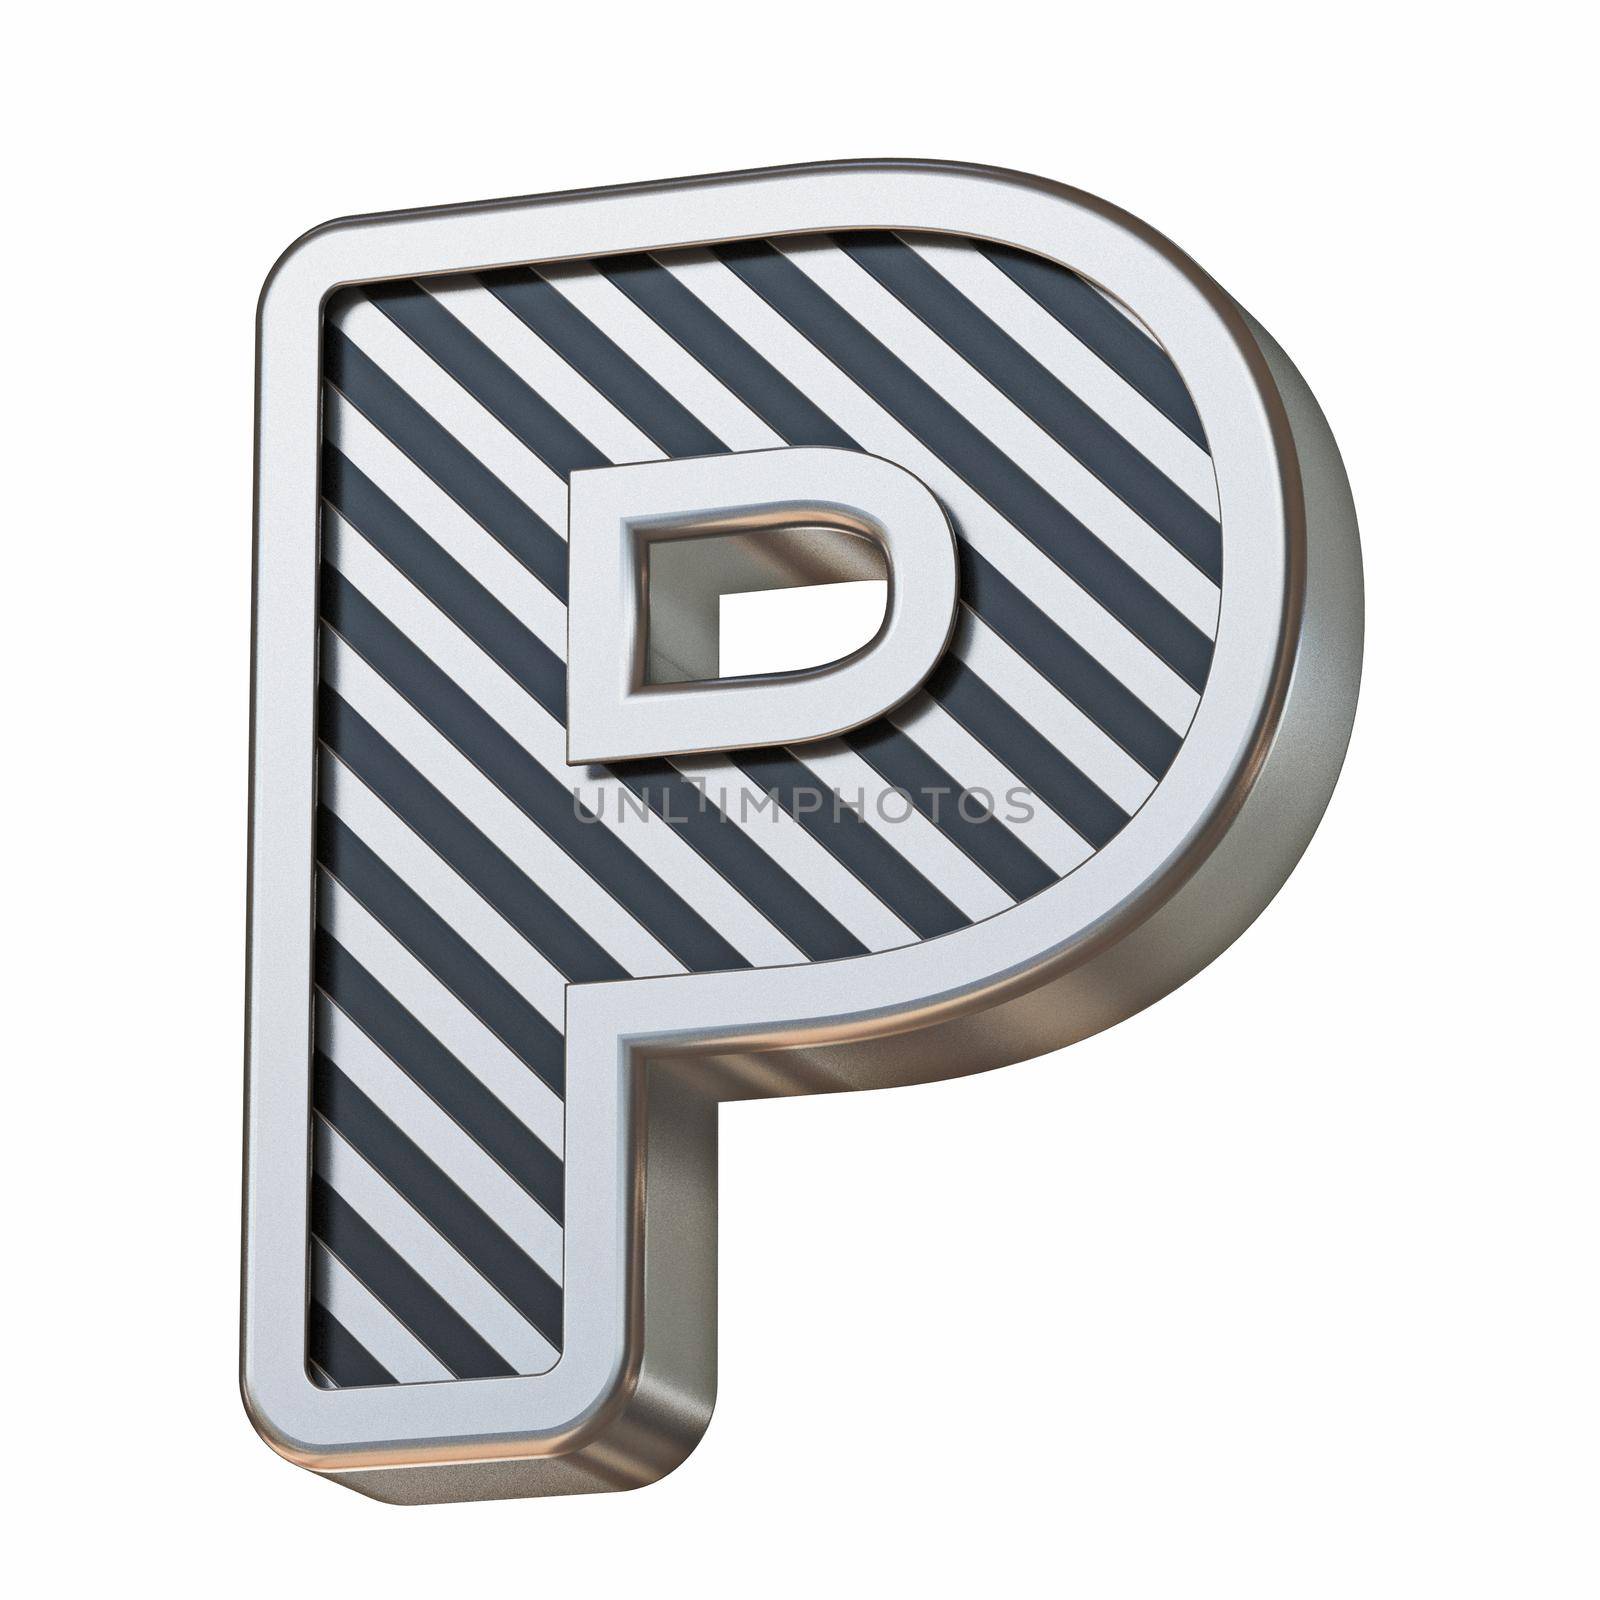 Stainless steel and black stripes font Letter P 3D rendering illustration isolated on white background